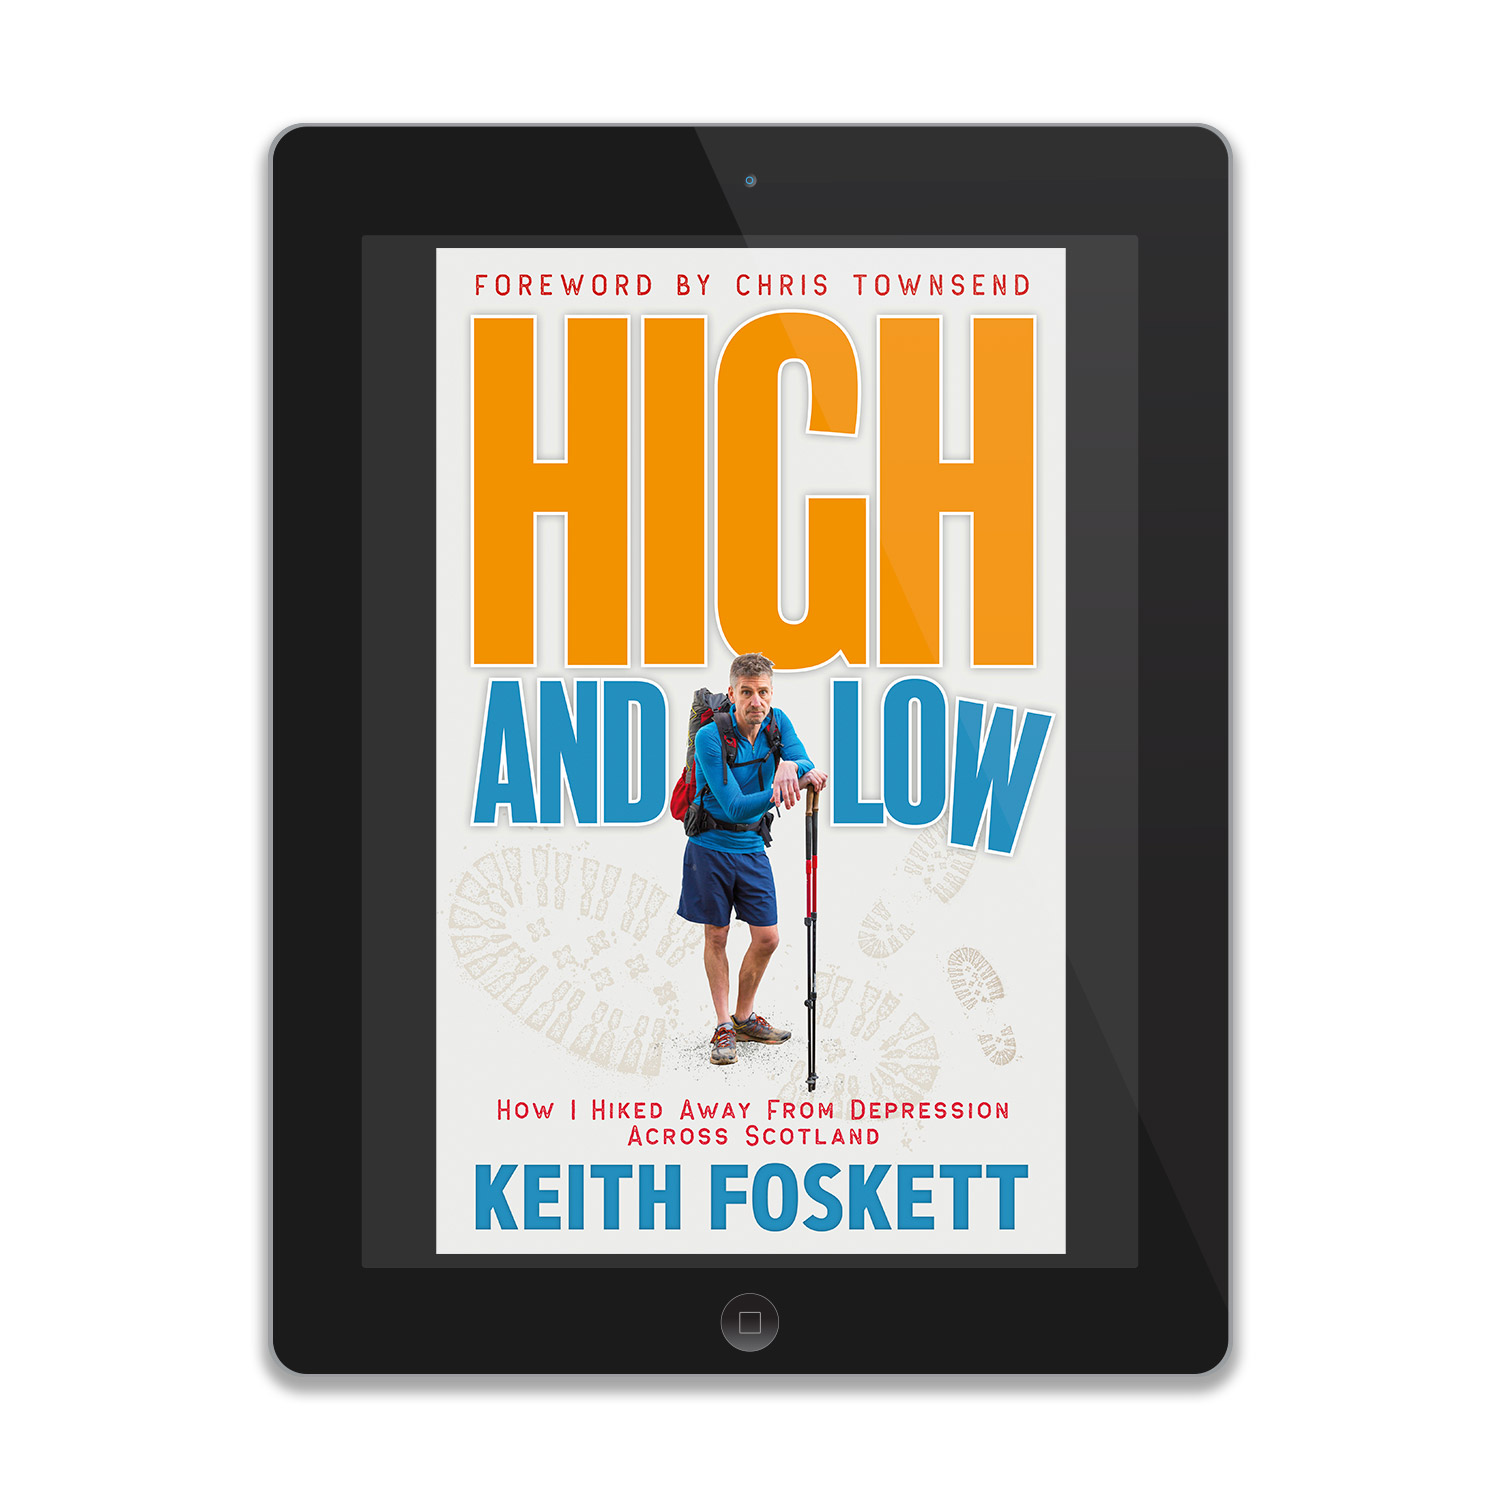 'High and Low' is a humorous and touching walking memoir, by Keith Foskett. The book cover was designed by Mark Thomas, of coverness.com. To find out more about my book design services, please visit www.coverness.com.